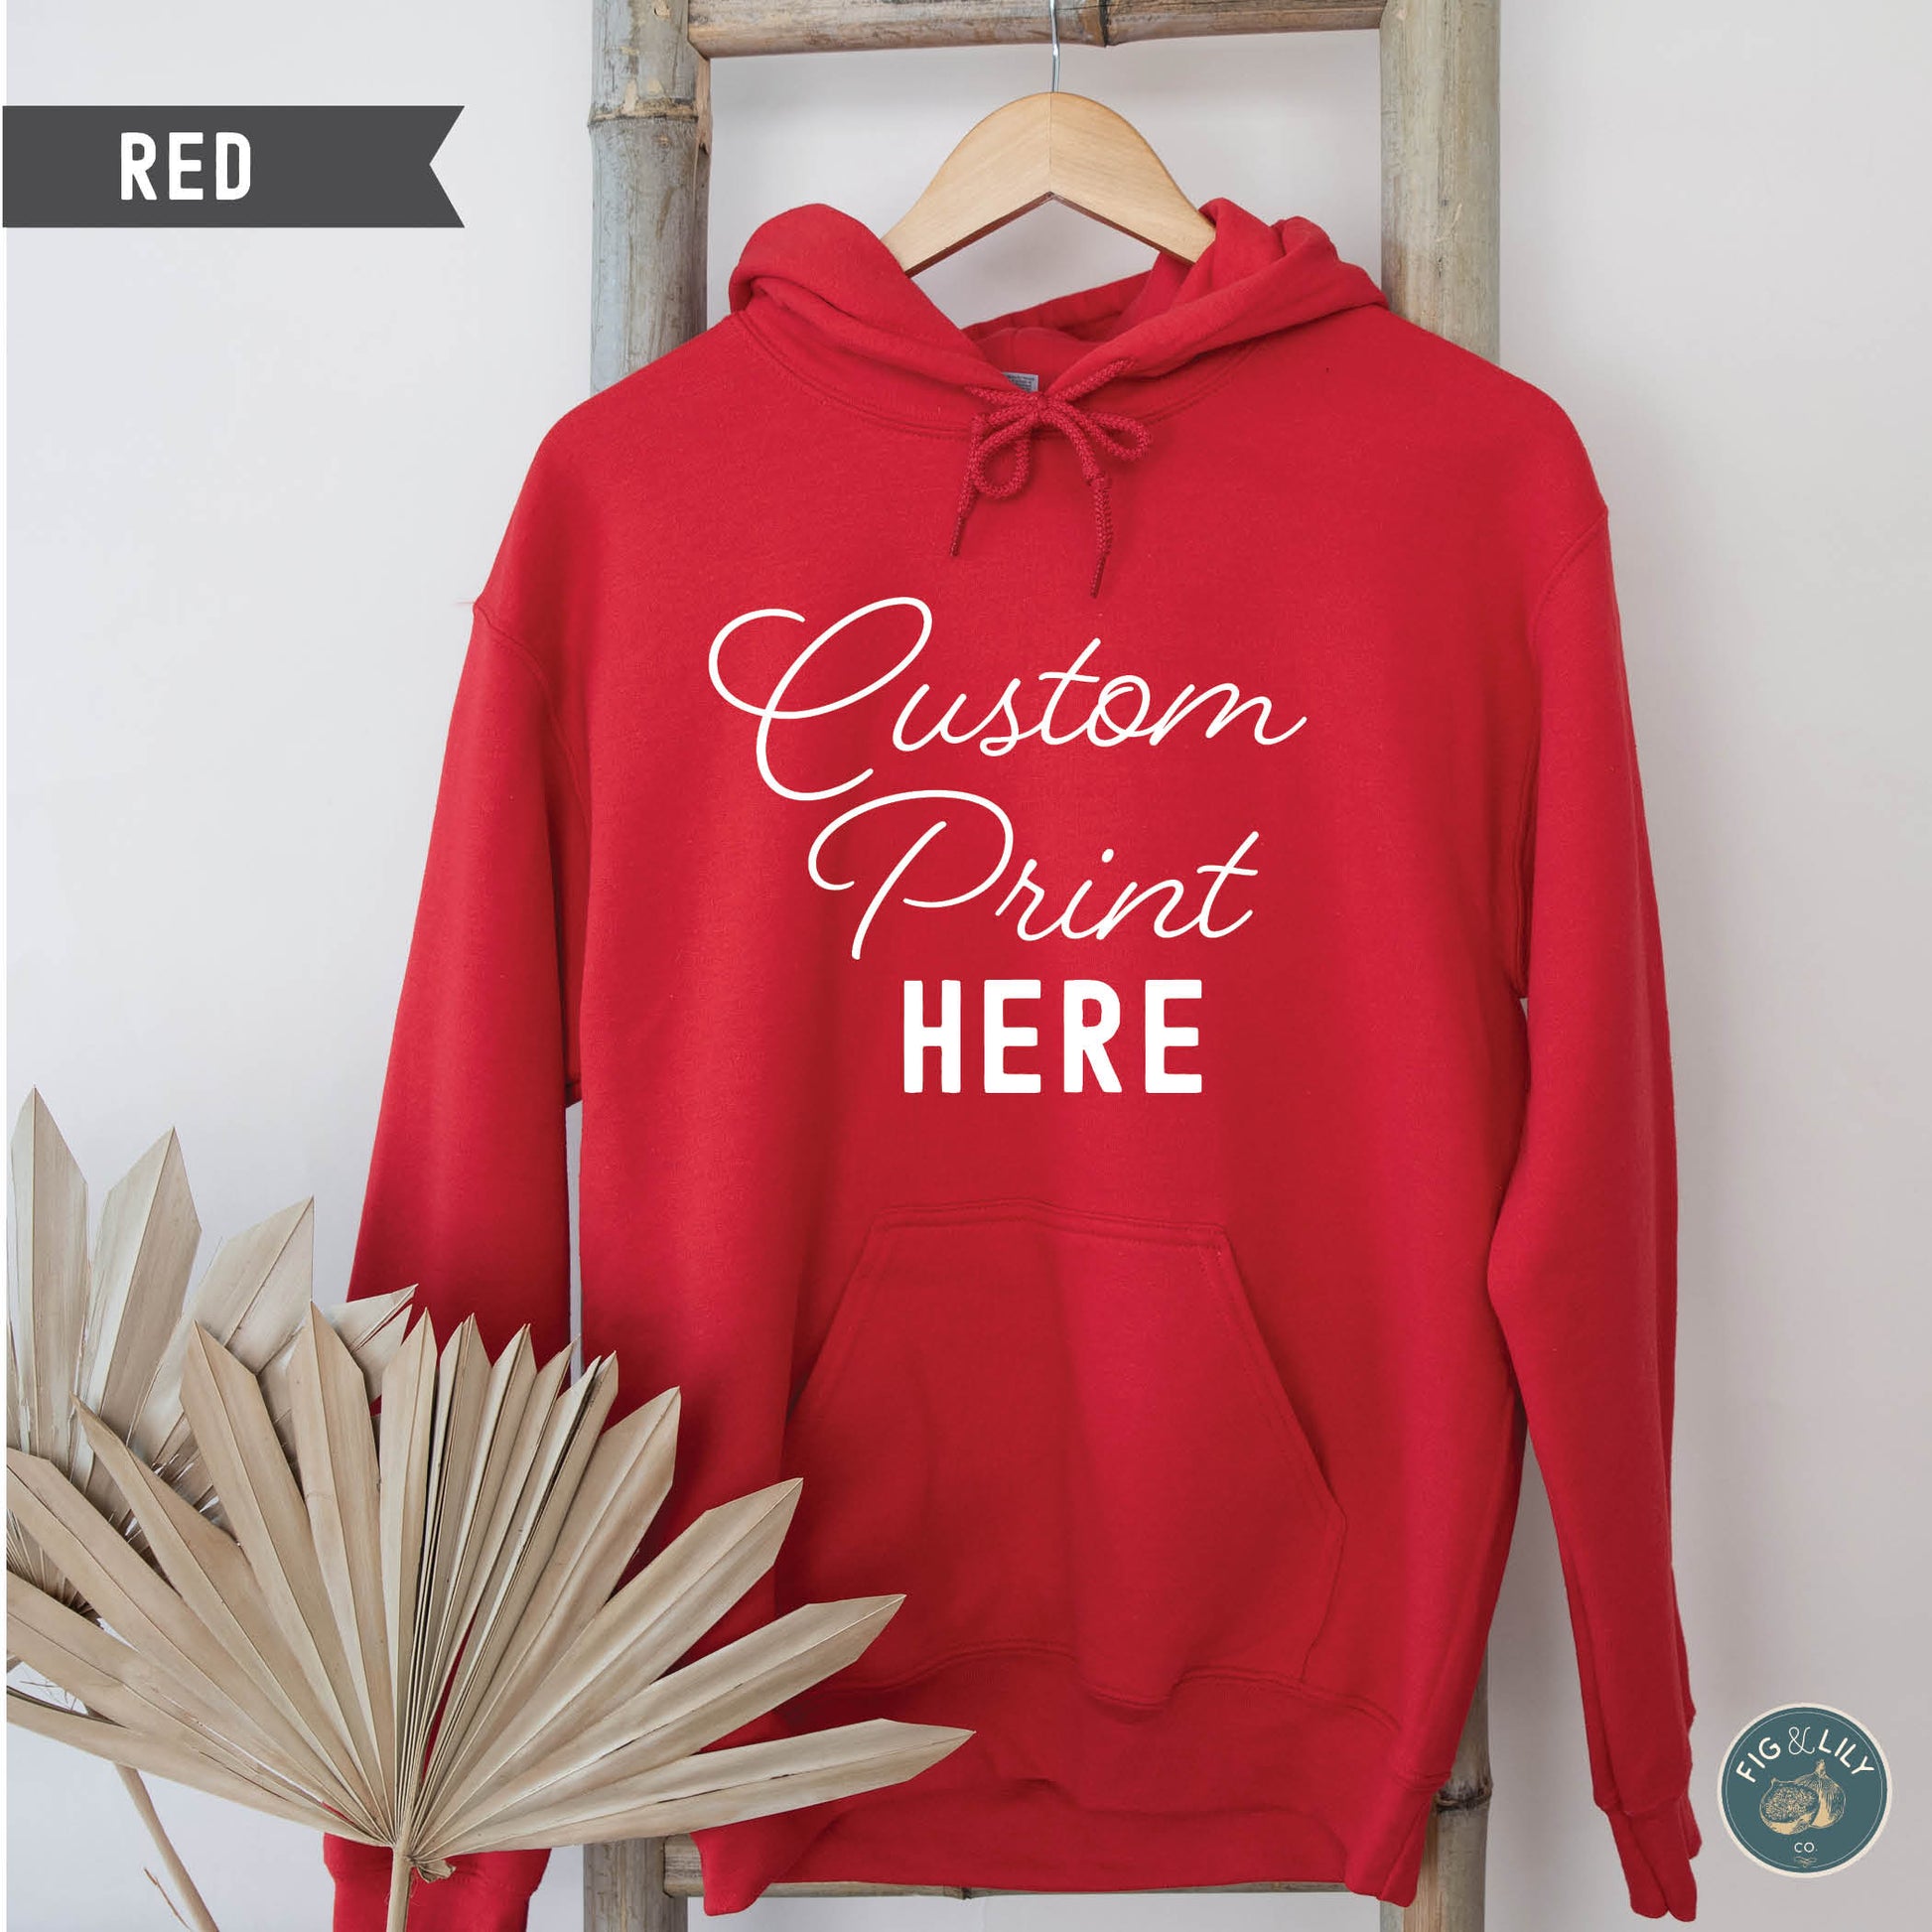 Red Unisex Hoodie, Custom Printed sweatshirt Design, Your Design Here, Personalized Design created just for you, digital proof approval included